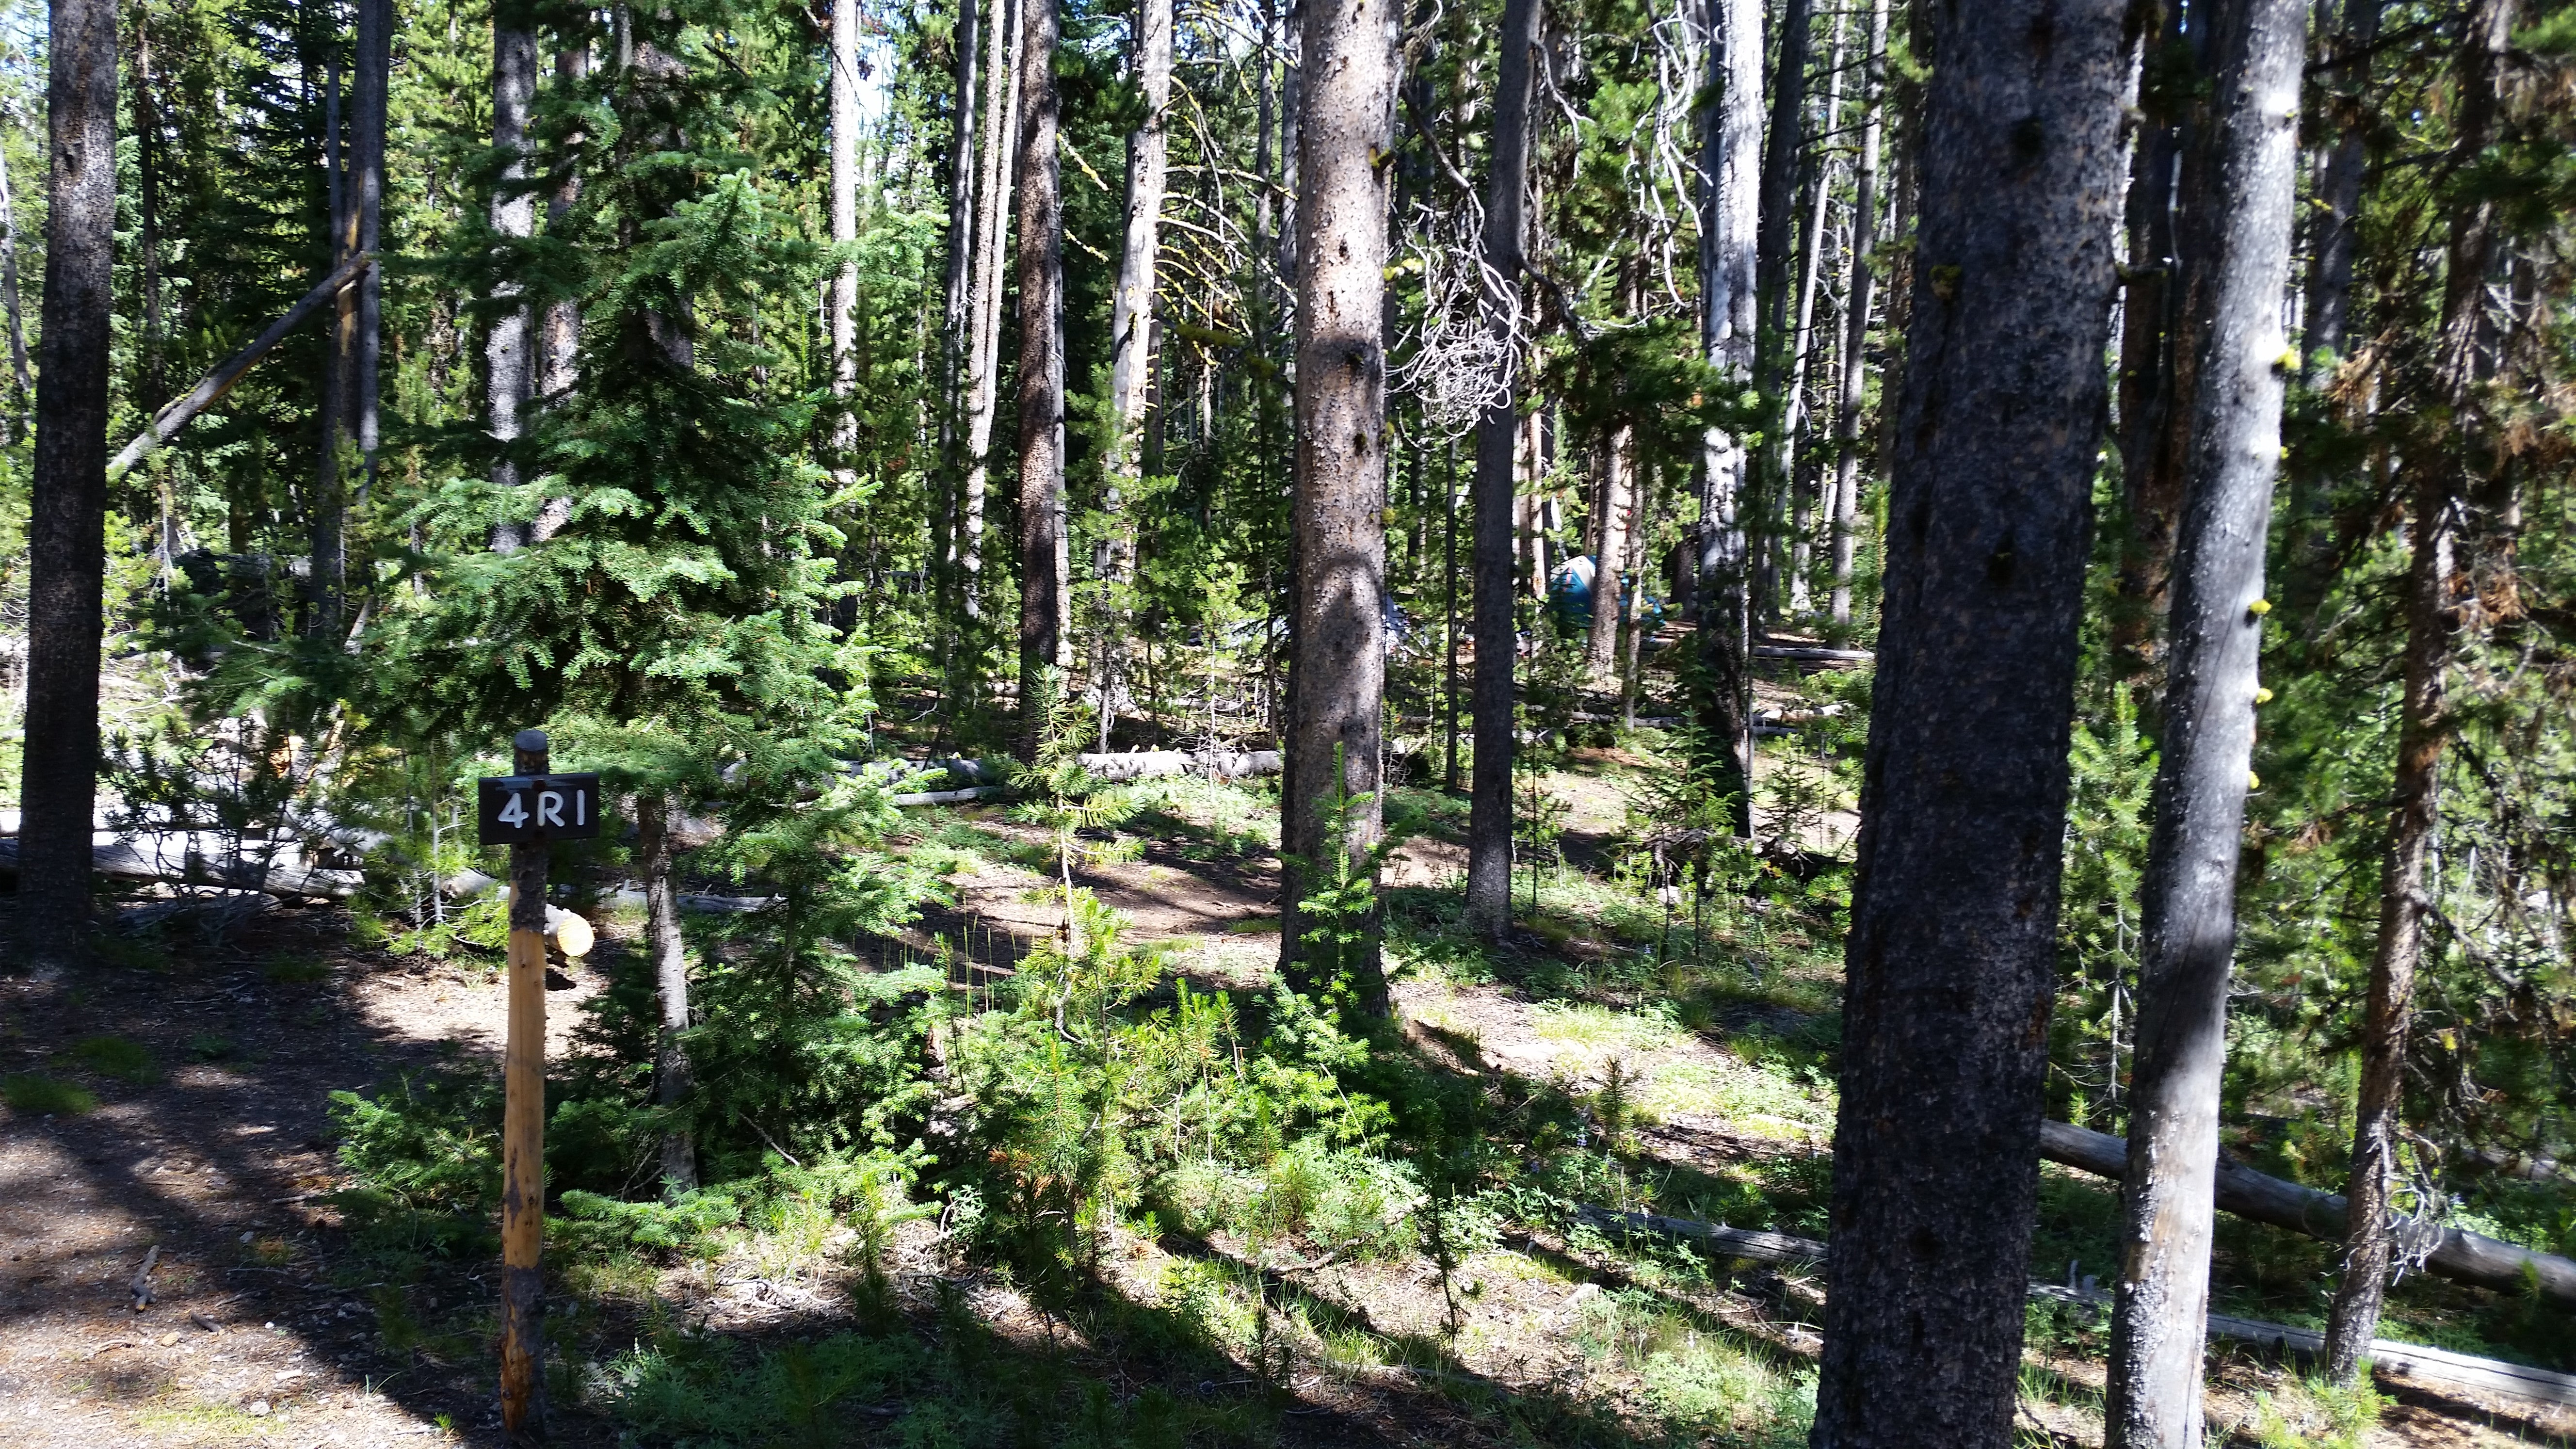 Camper submitted image from 4R1 Yellowstone National Park Backcountry — Yellowstone National Park - 2